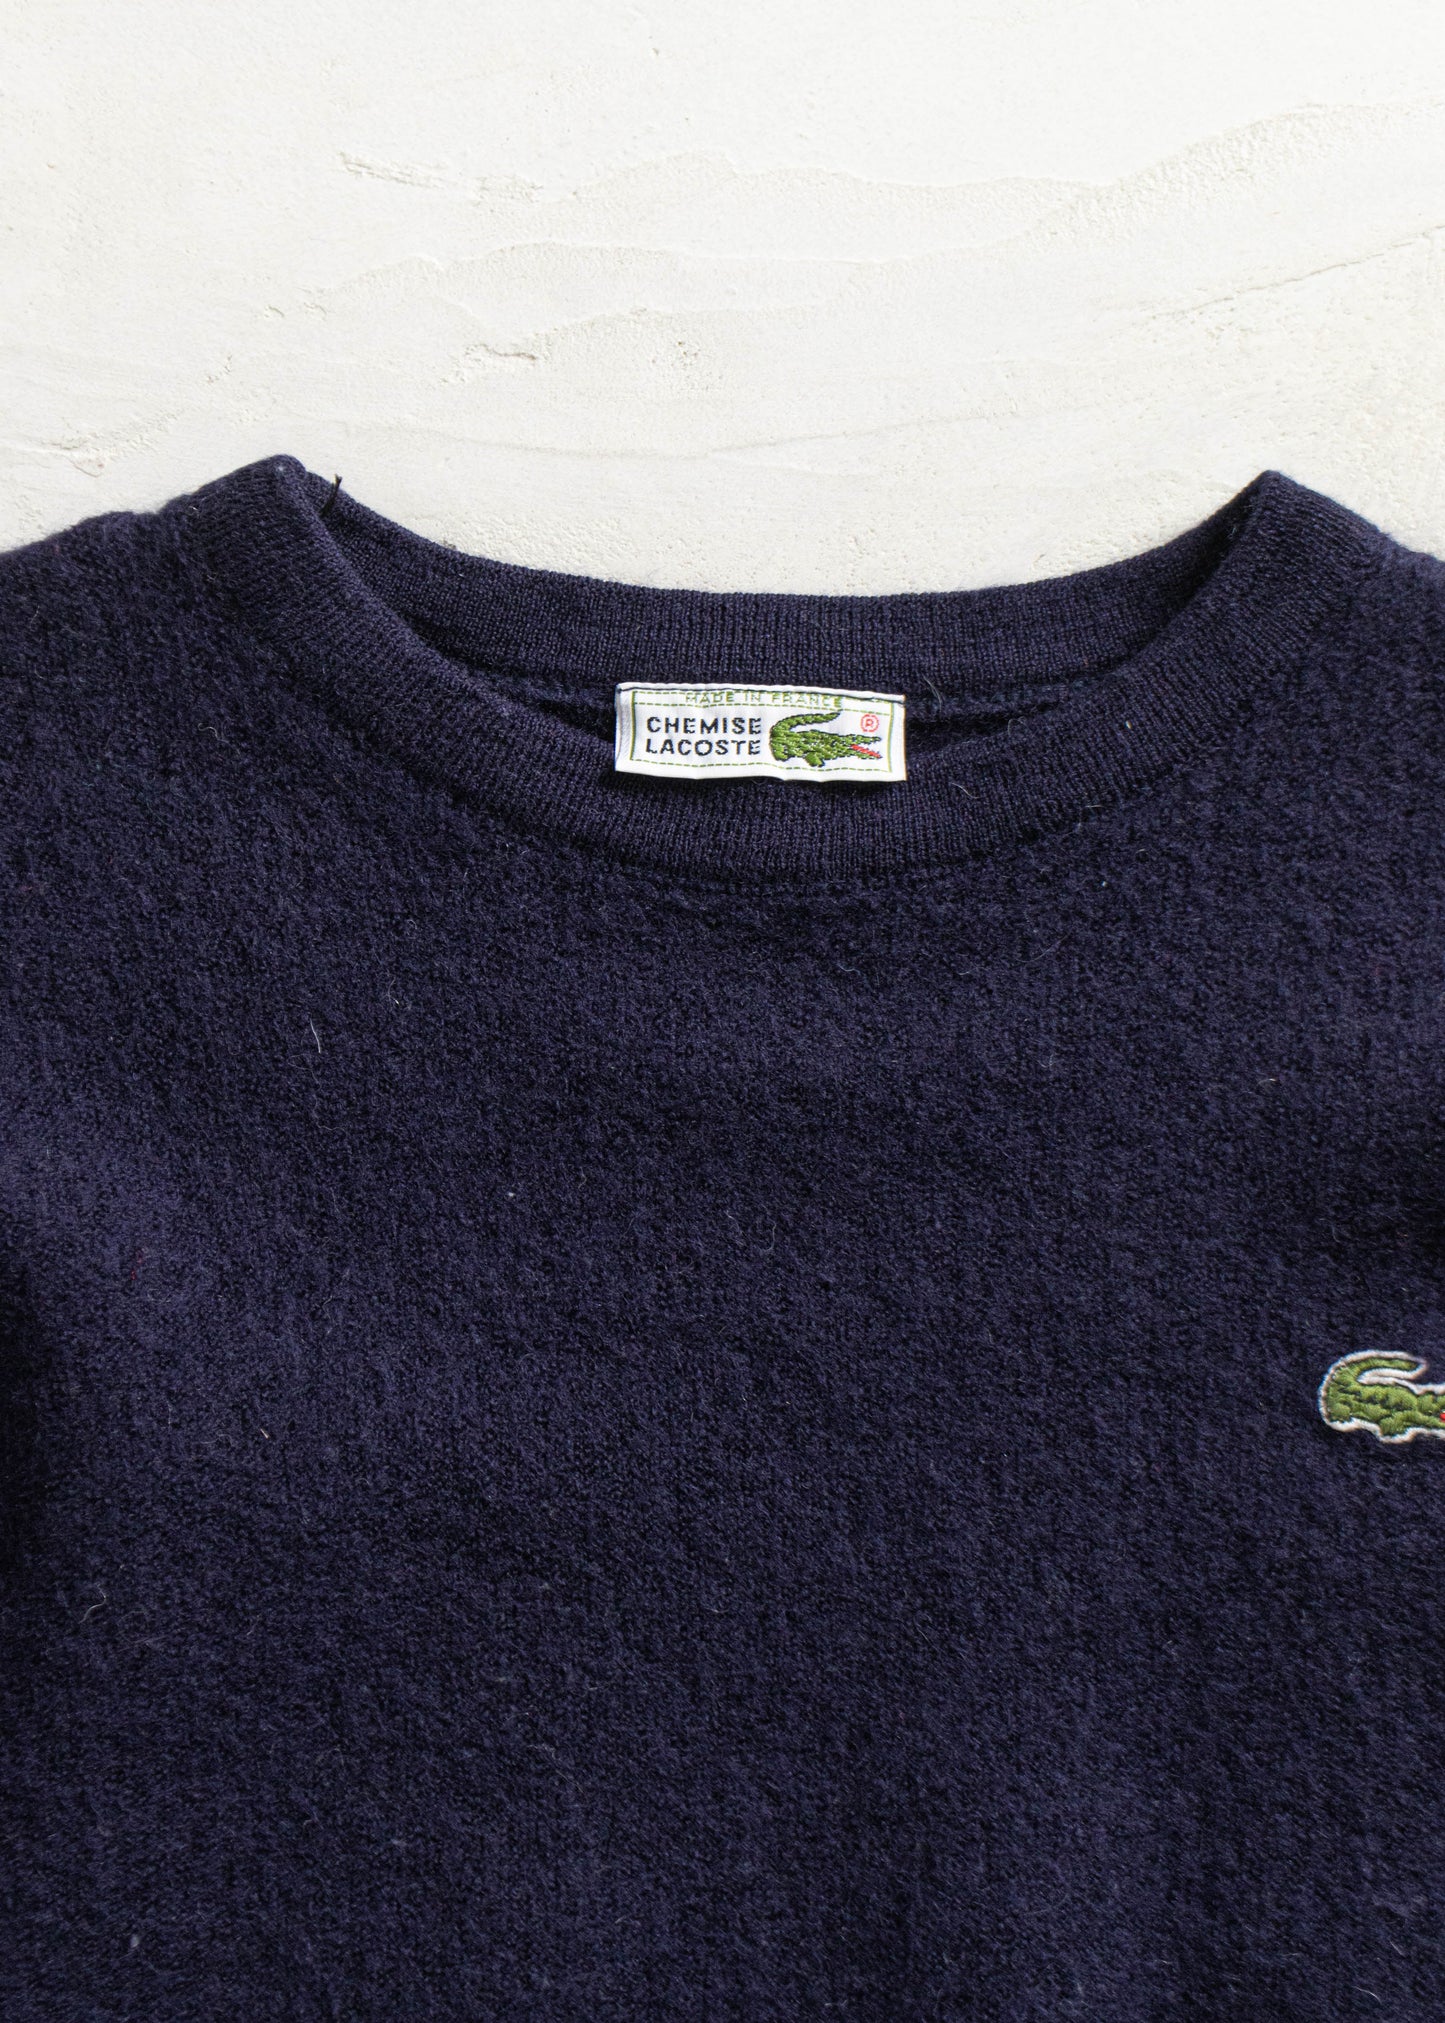 Vintage 1980s Lacoste Wool Pullover Sweater Size S/M